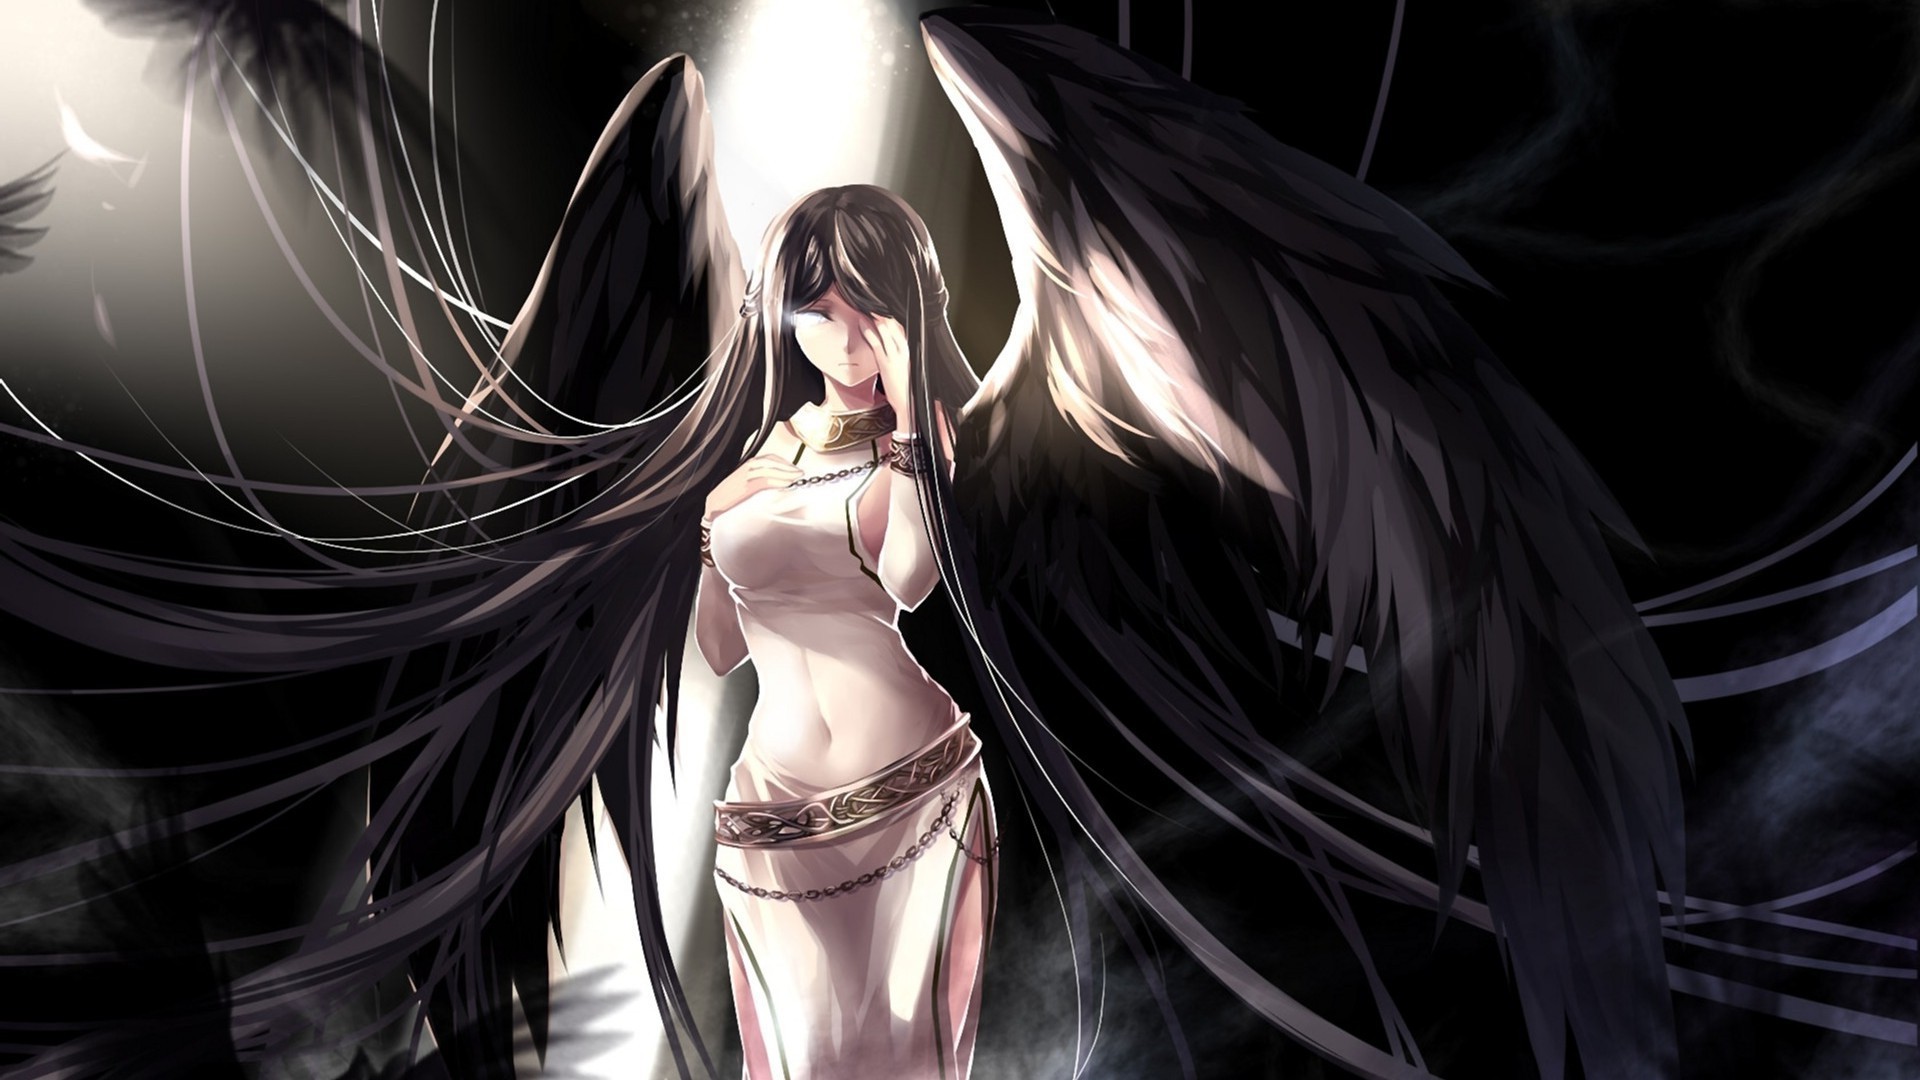 1920px x 1080px - Sexy angel girl in fantasy style - desktop wallpapers